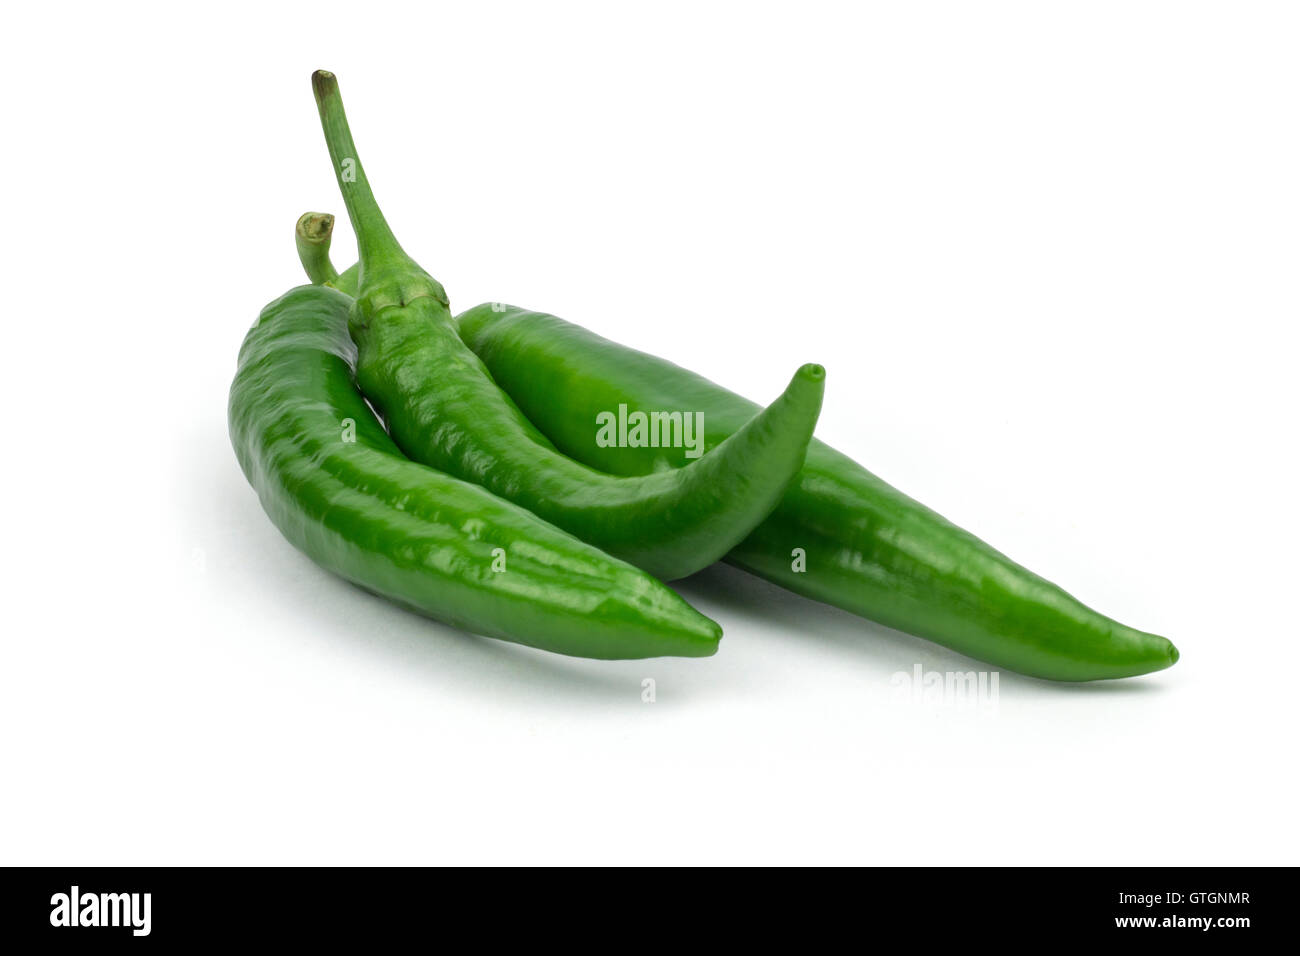 Hot green pepper/s isolated on white background. Clipping path included in jpeg. Stock Photo